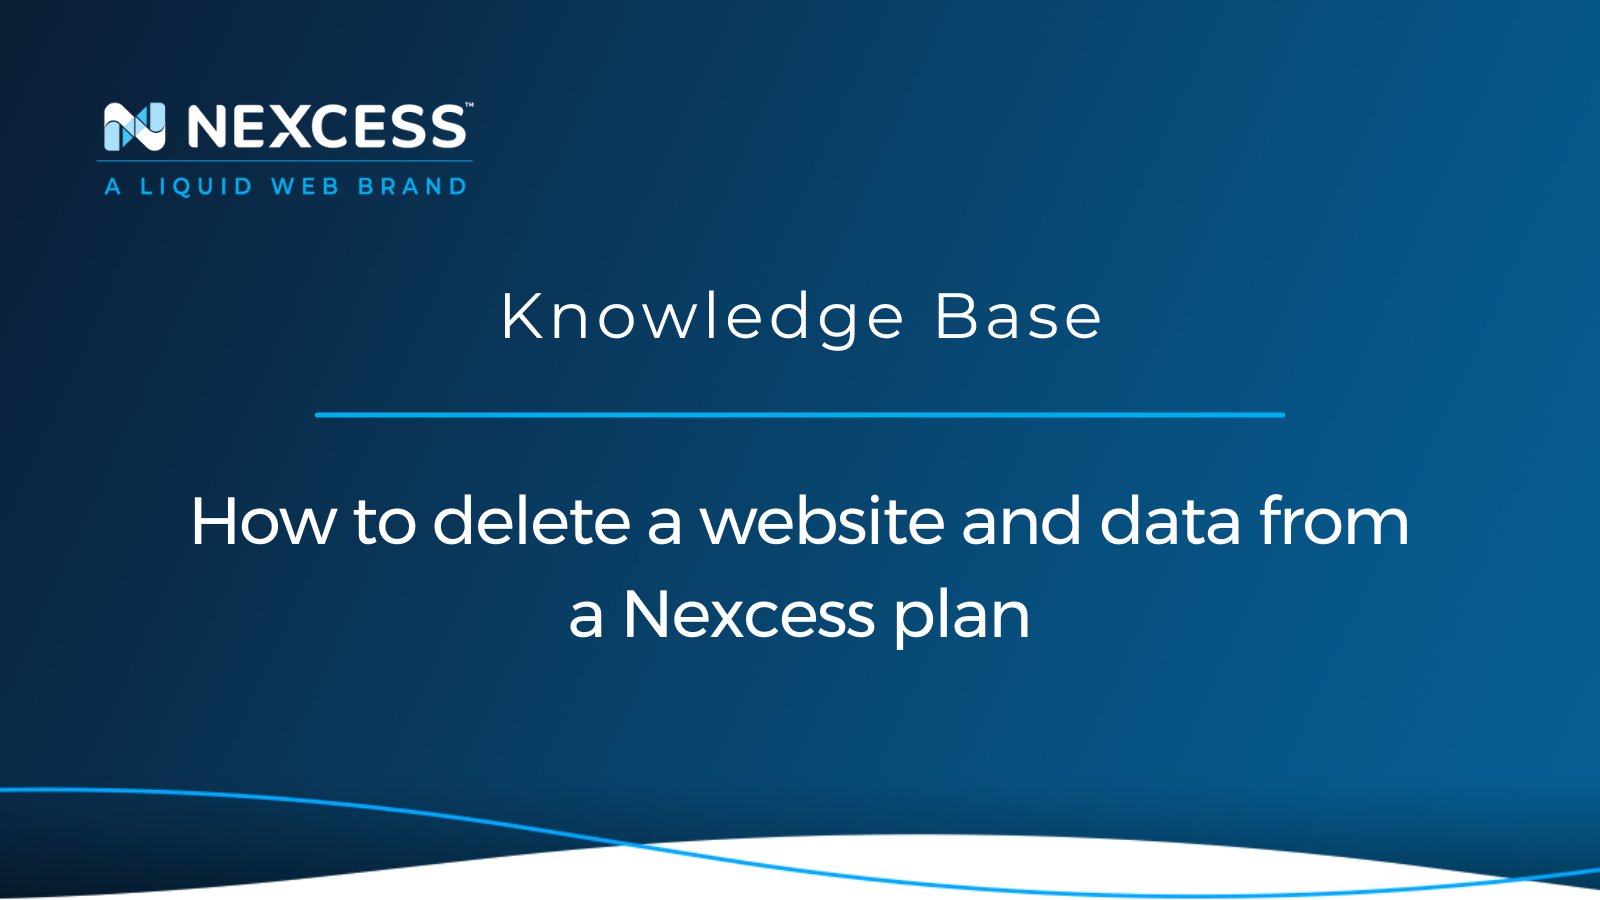 How to delete a website and data from a Nexcess plan